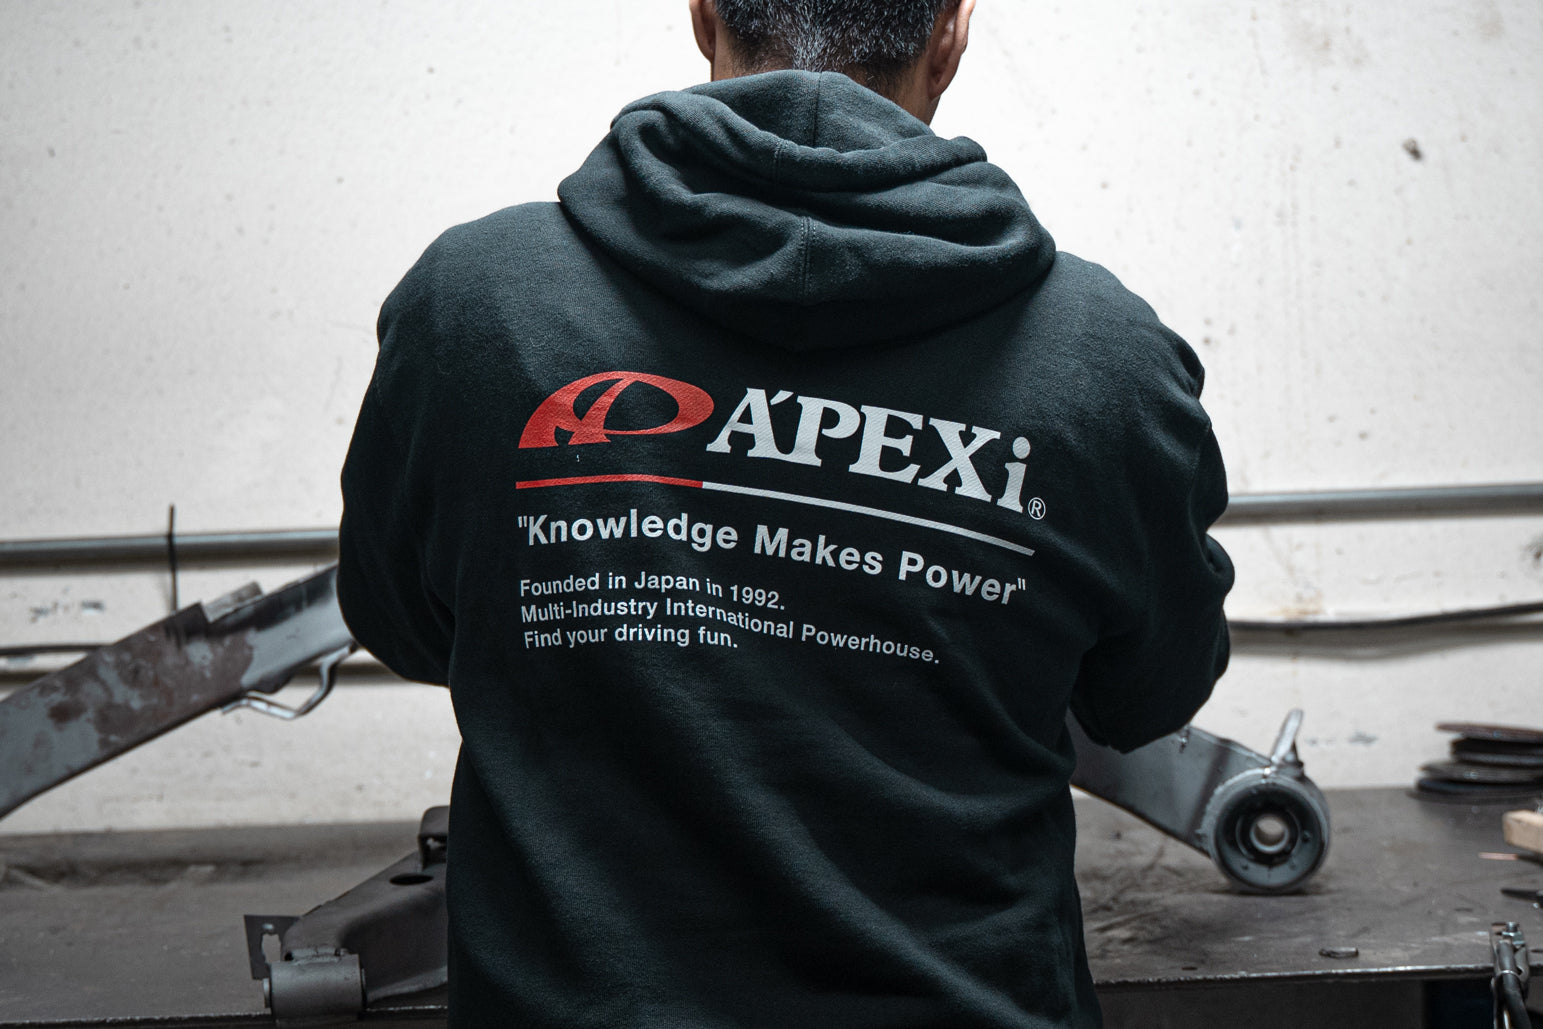 A'PEXi Hoodie - Classic Knowledge Makes Power - Black